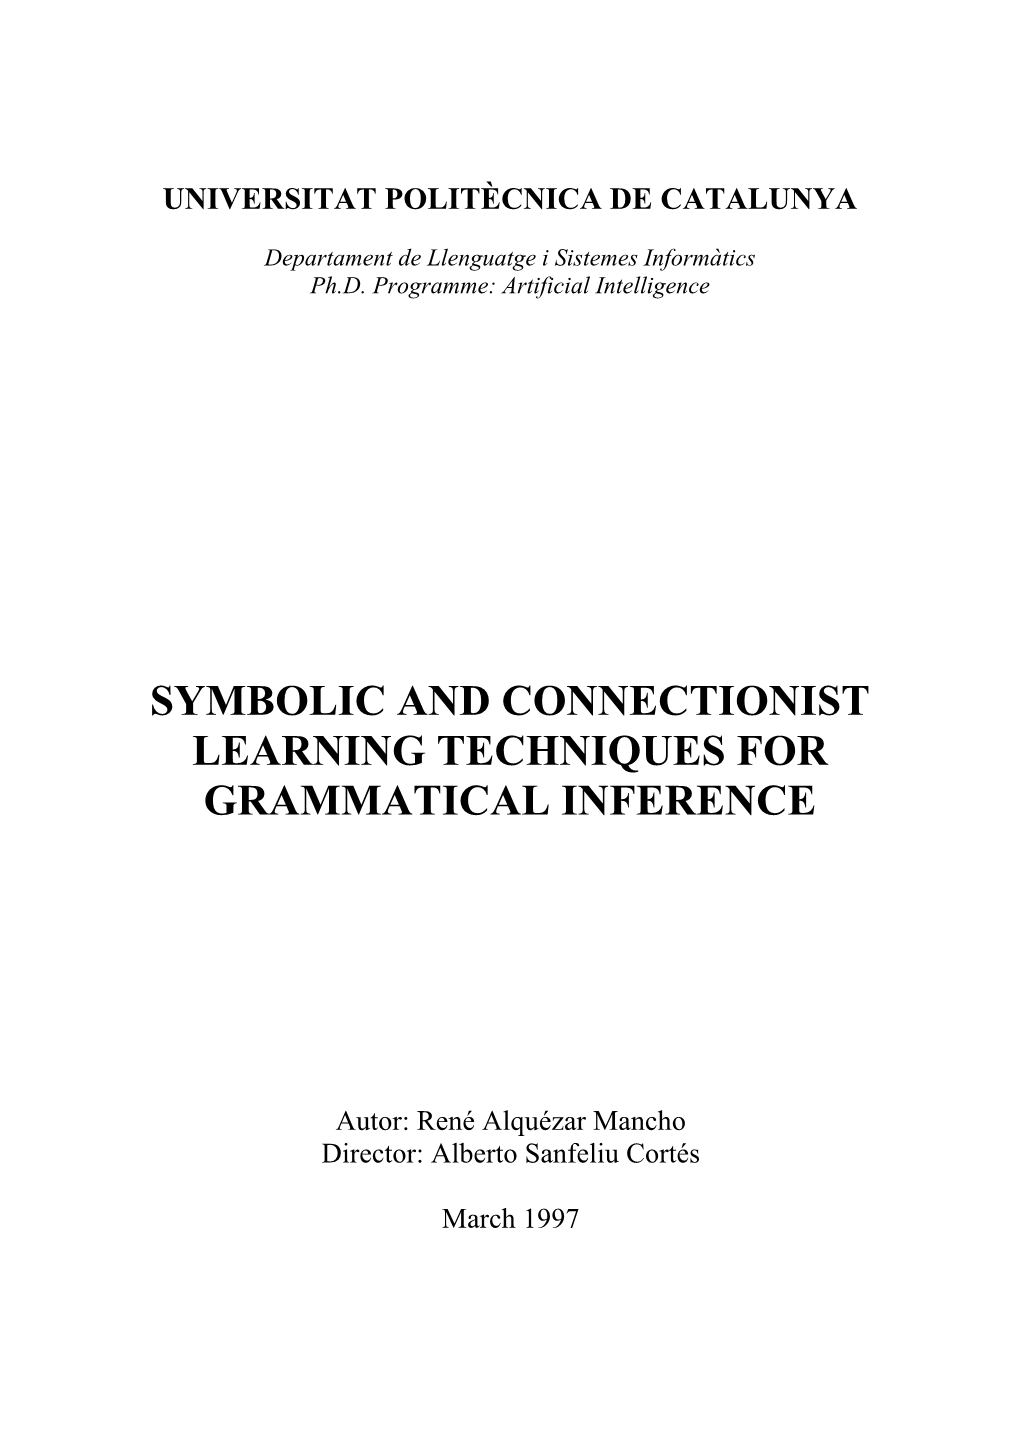 Symbolic and Connectionist Learning Techniques for Grammatical Inference